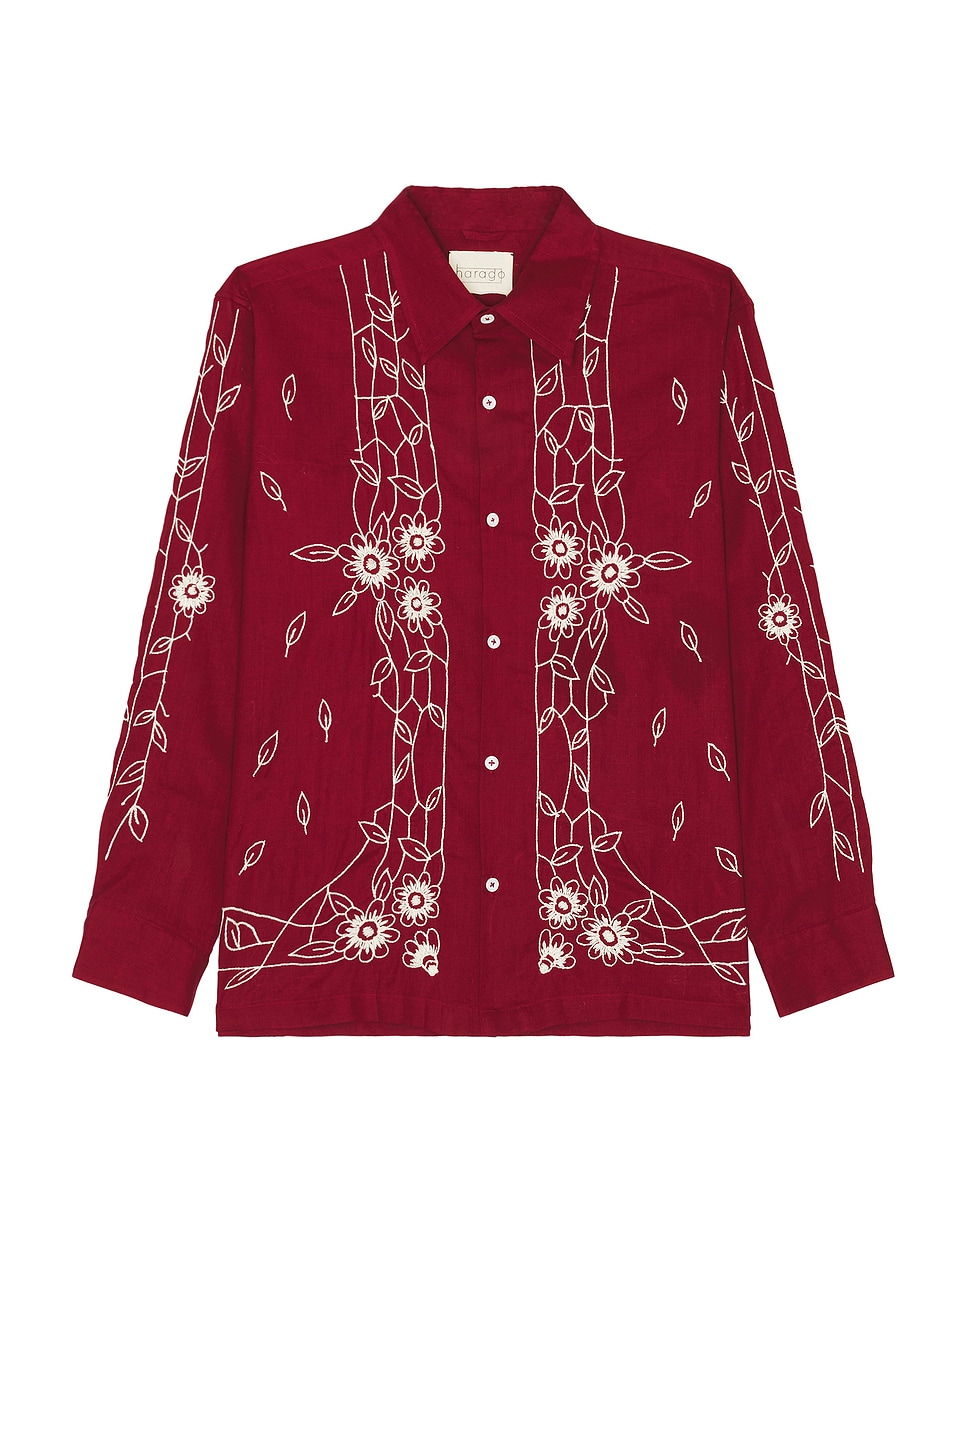 Image 1 of HARAGO Floral Embroidered Shirt in Burgundy